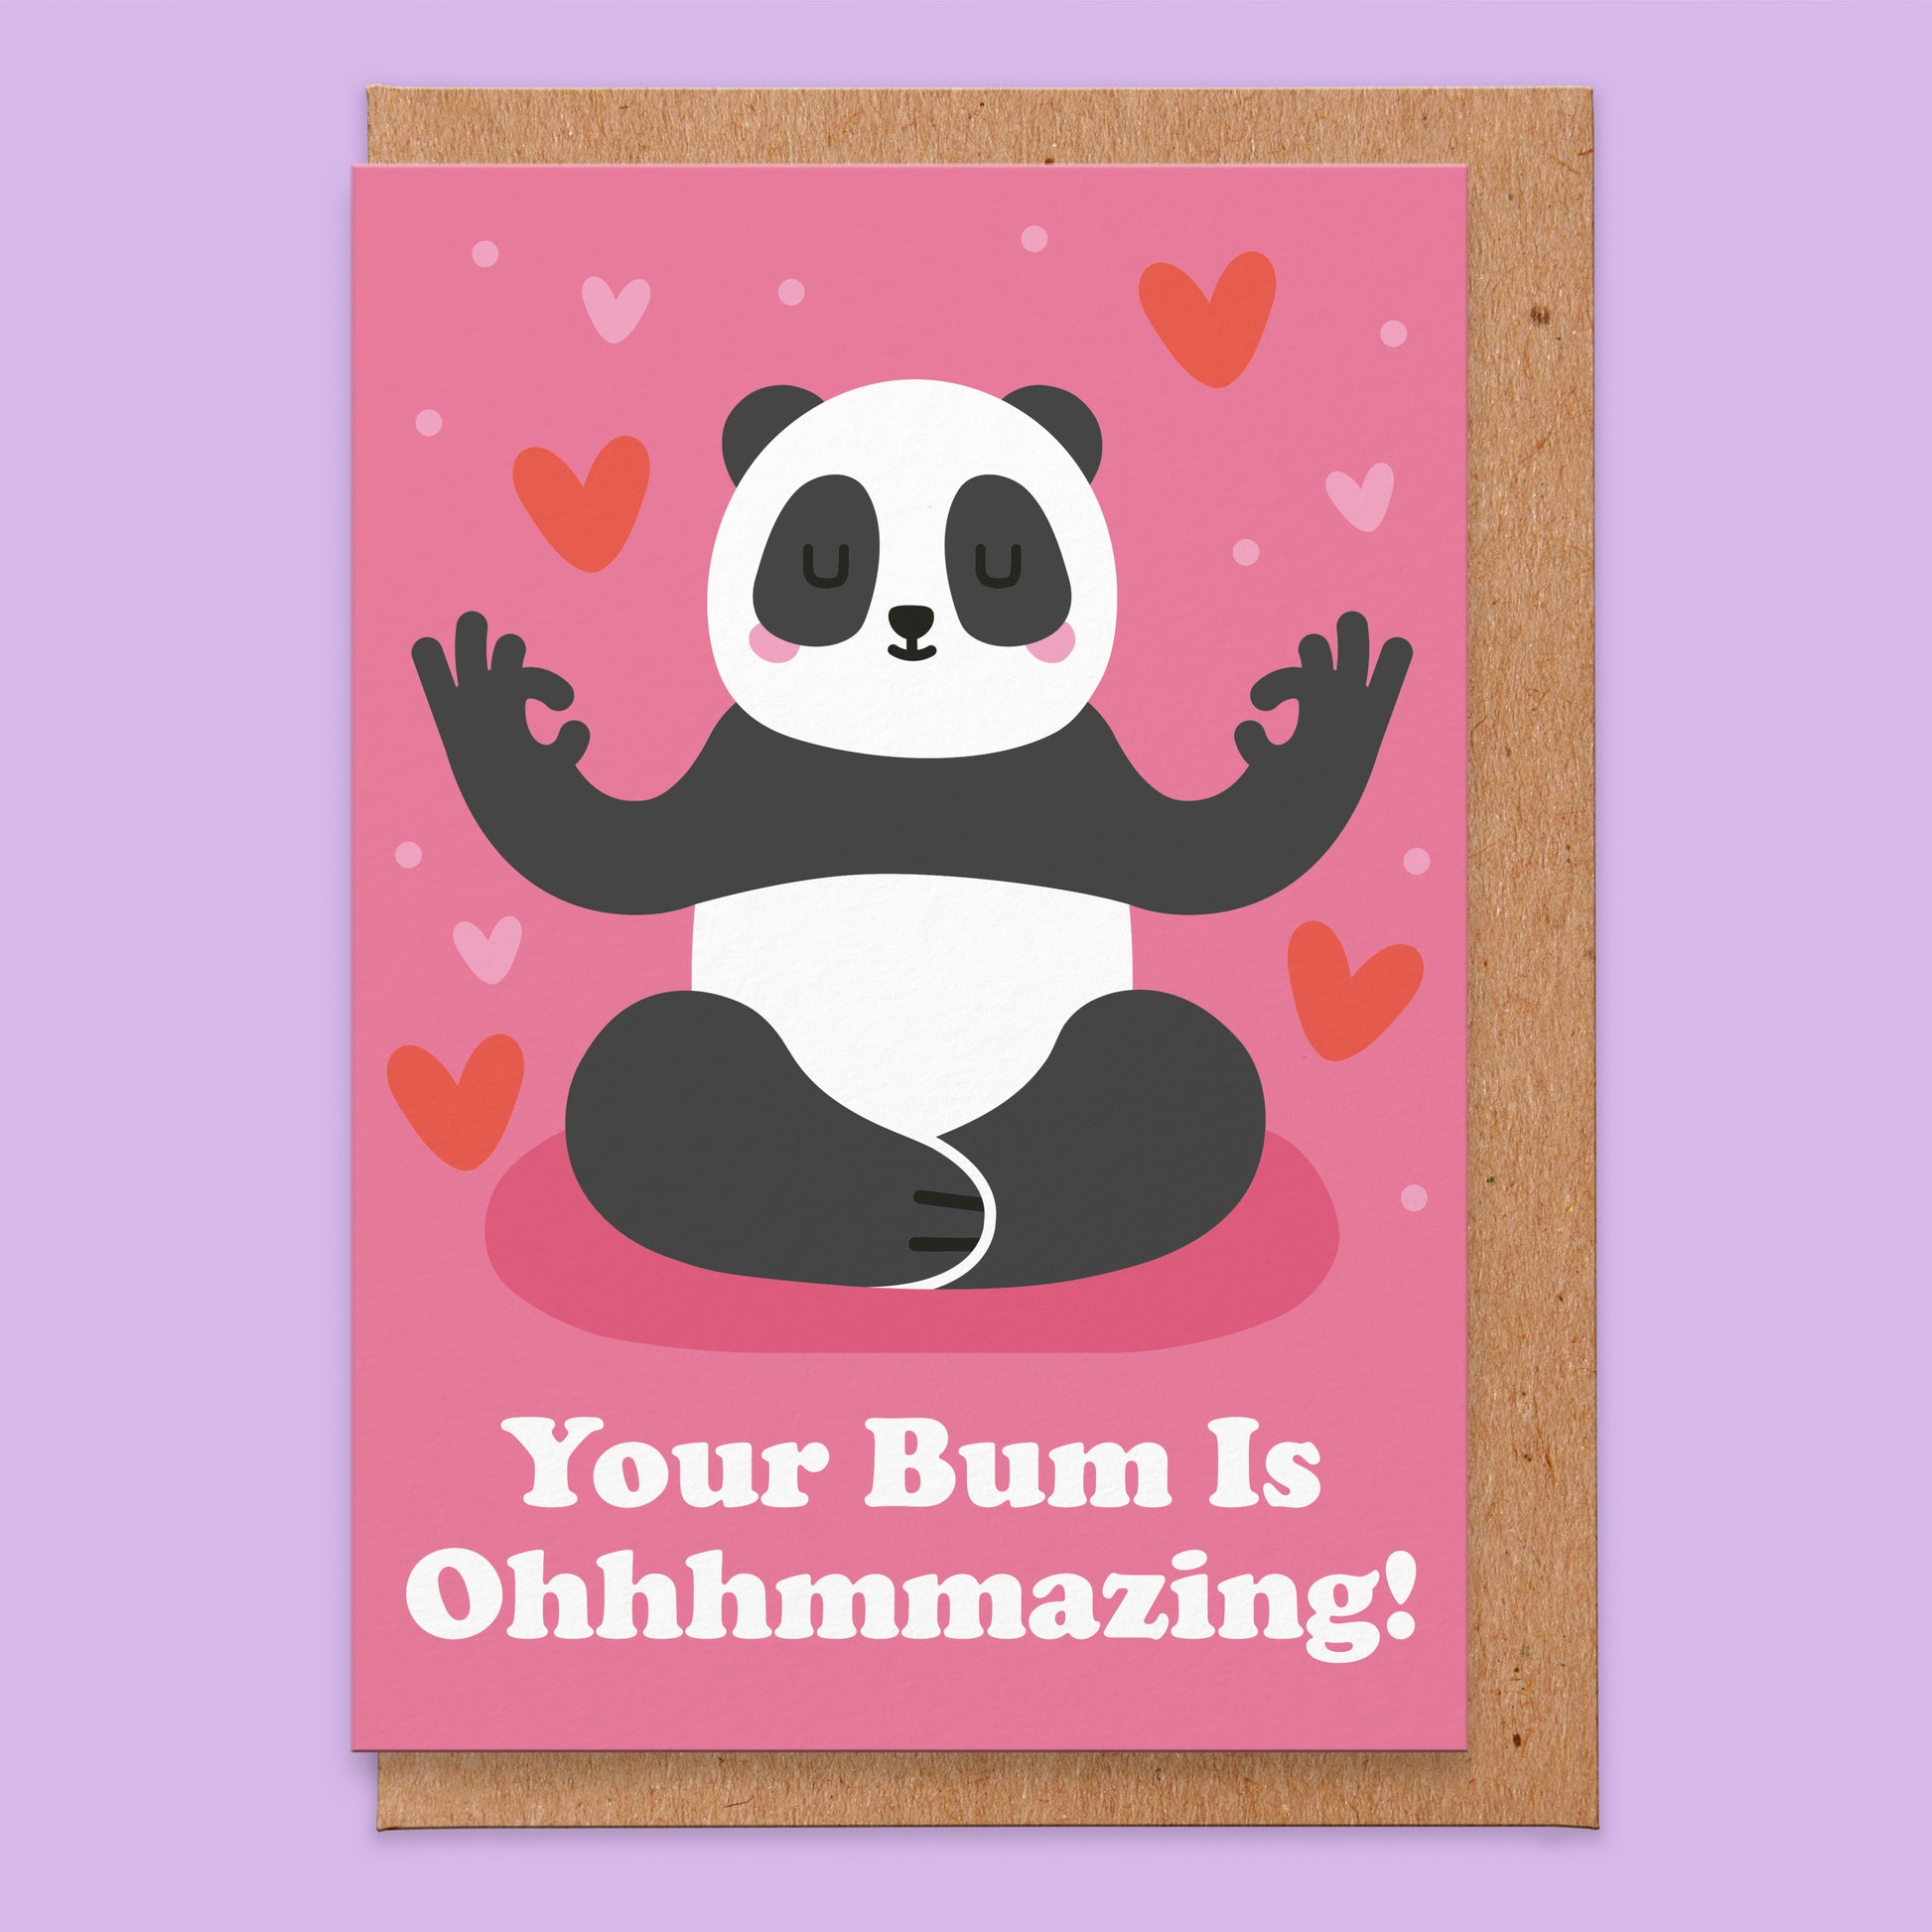 Greetings card with a panda in a yoga position and hearts in the background and reads Your Bum Is Ohhhmmazing!